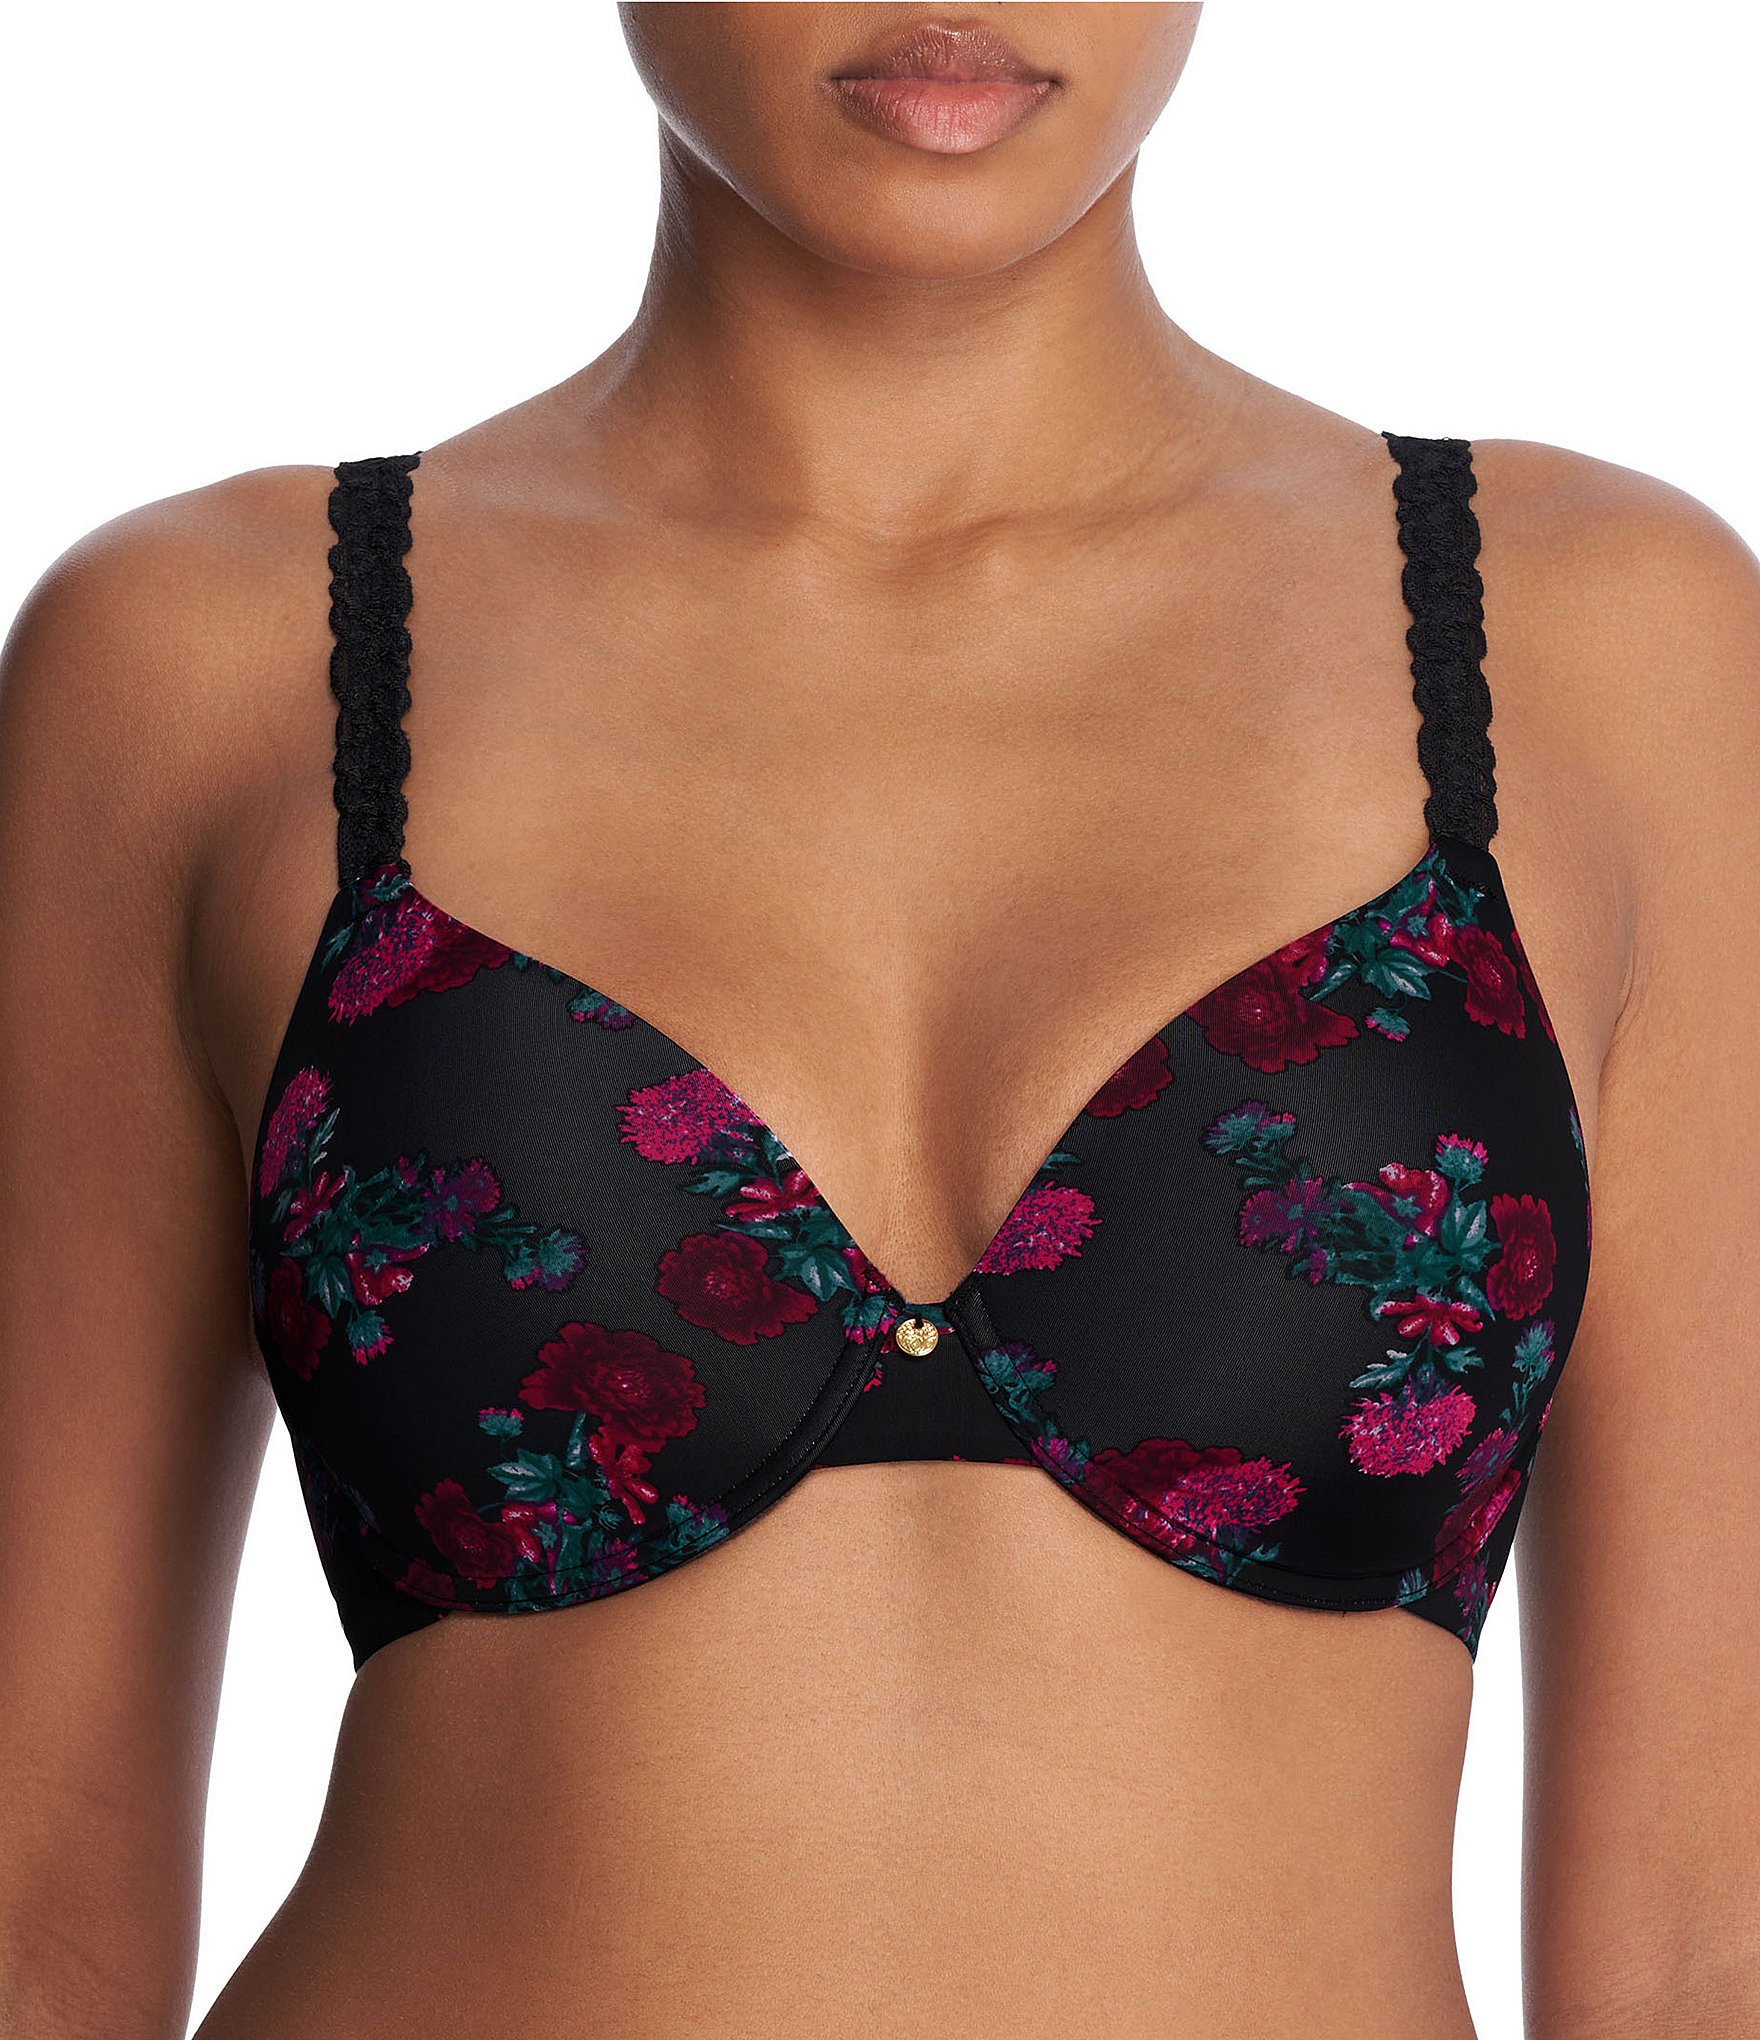 Natori Pure Luxe Floral Print Seamless Full-Busted Underwire U